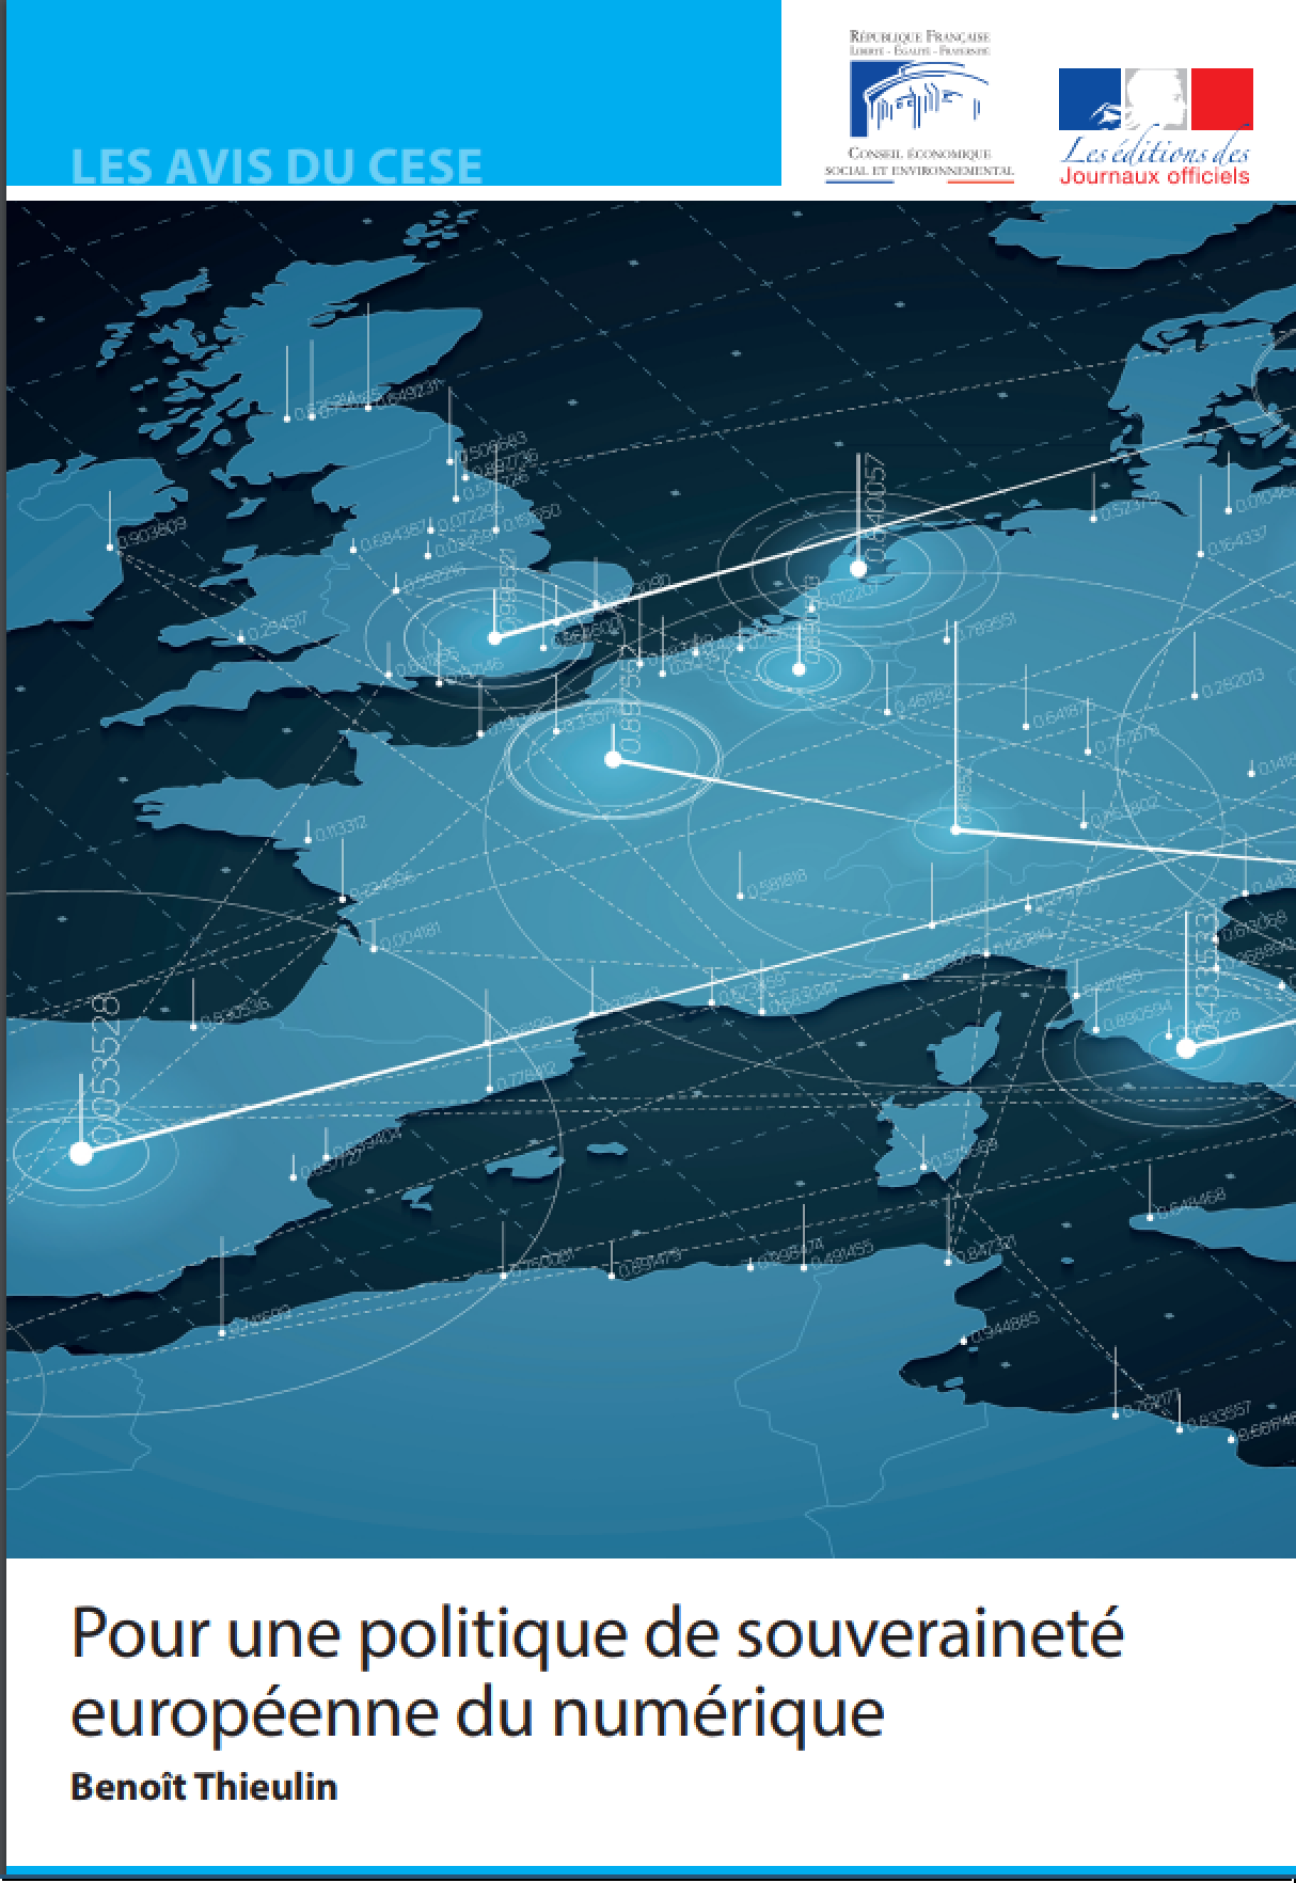 The image shows the cover of the report: The European Digital Sovereignty Policy, a report by France’s Economic, Social and Environmental Council (ESEC).